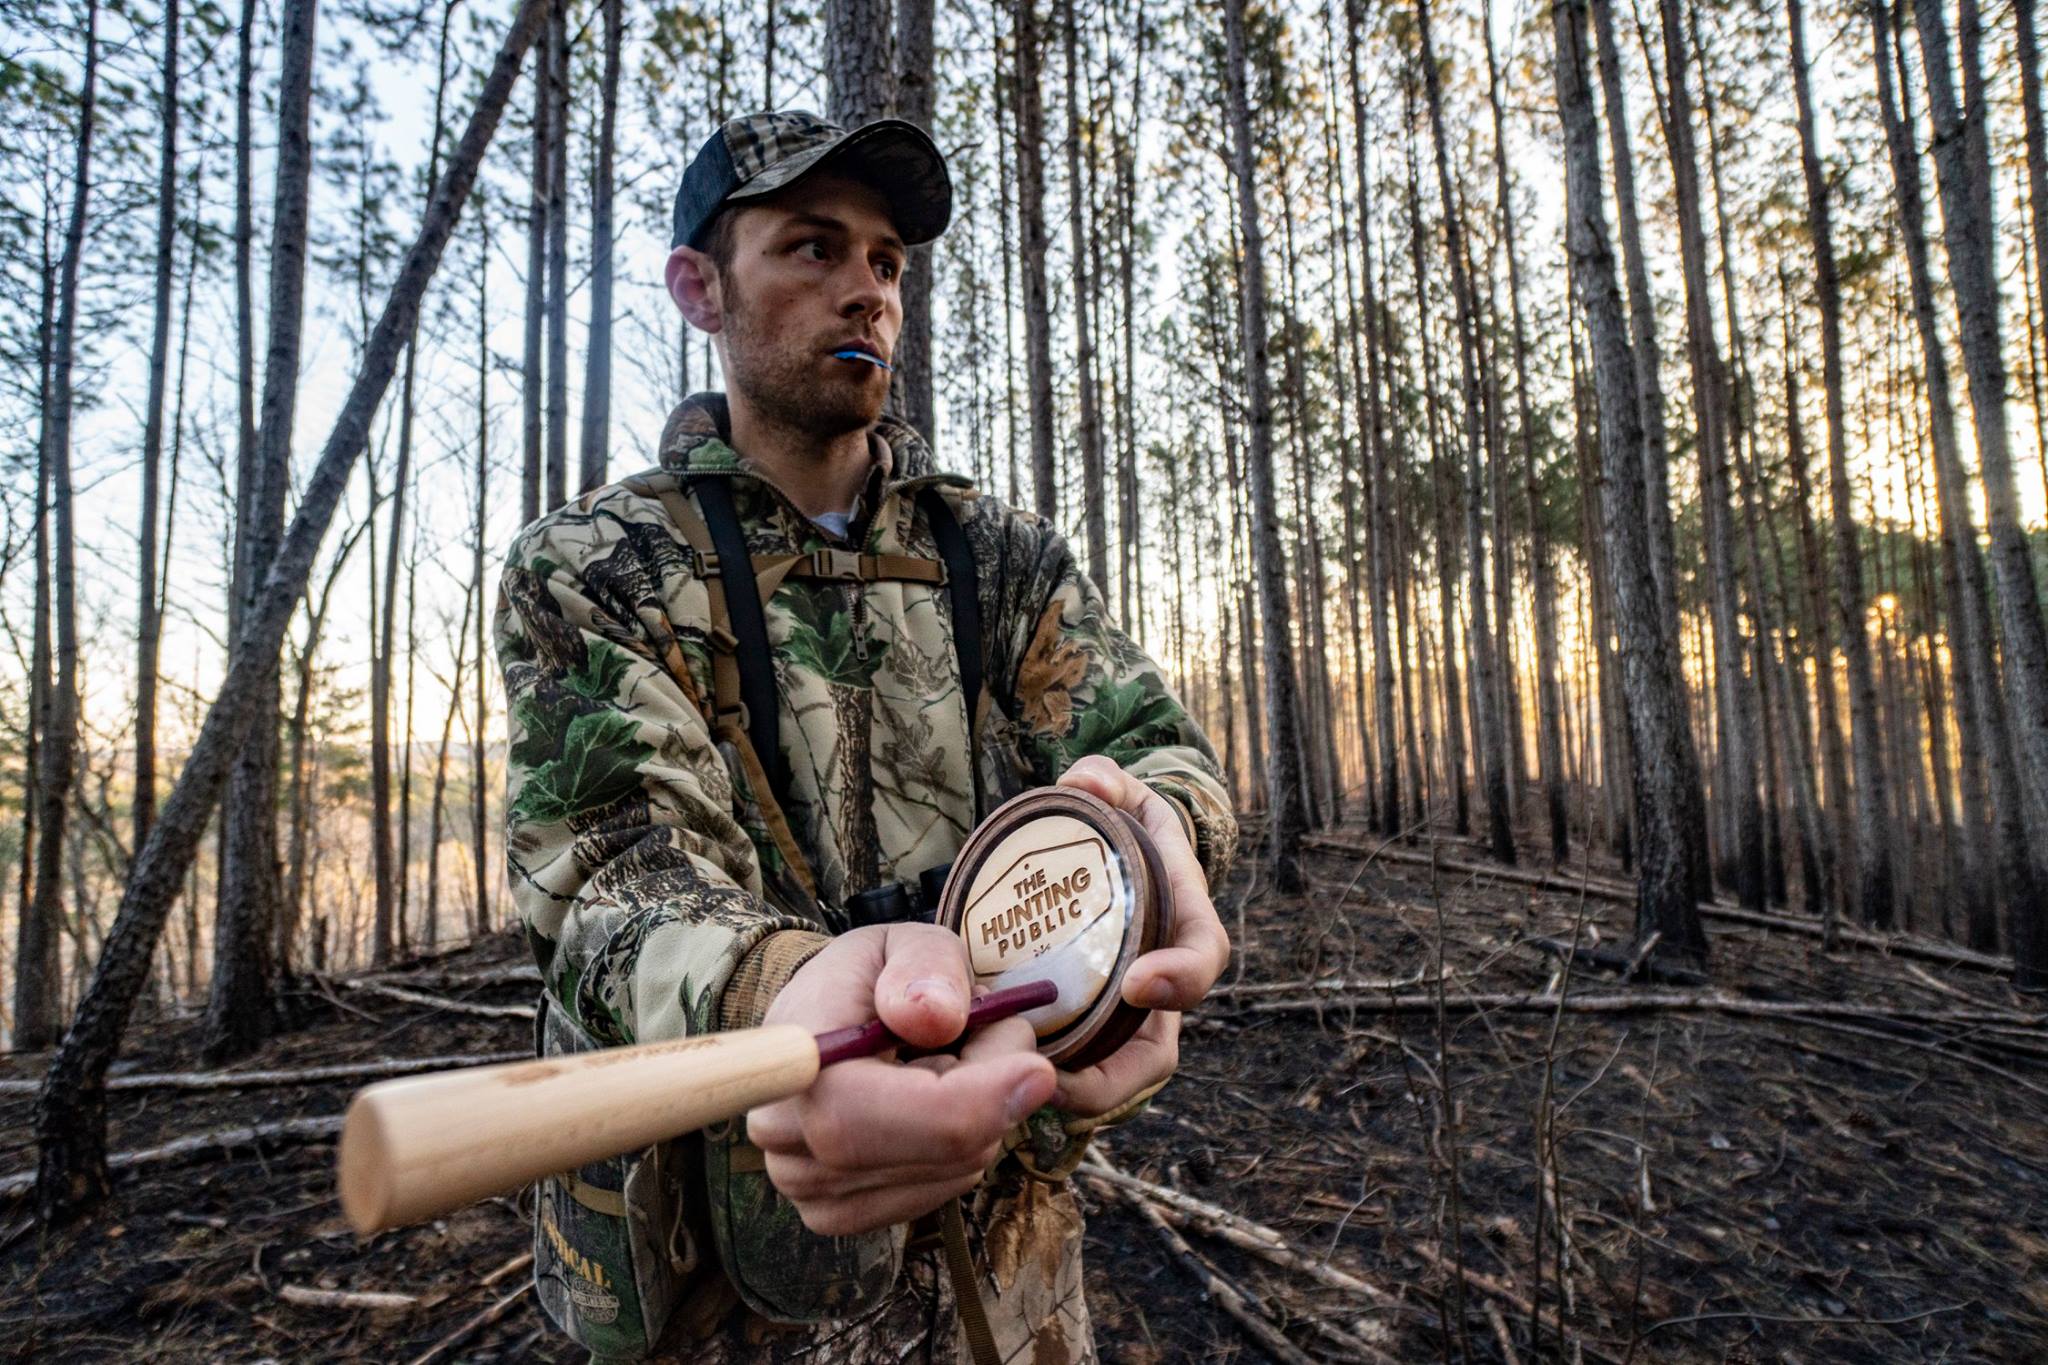 Aaron Warbritton of The Hunting Public working a pot and peg style call.